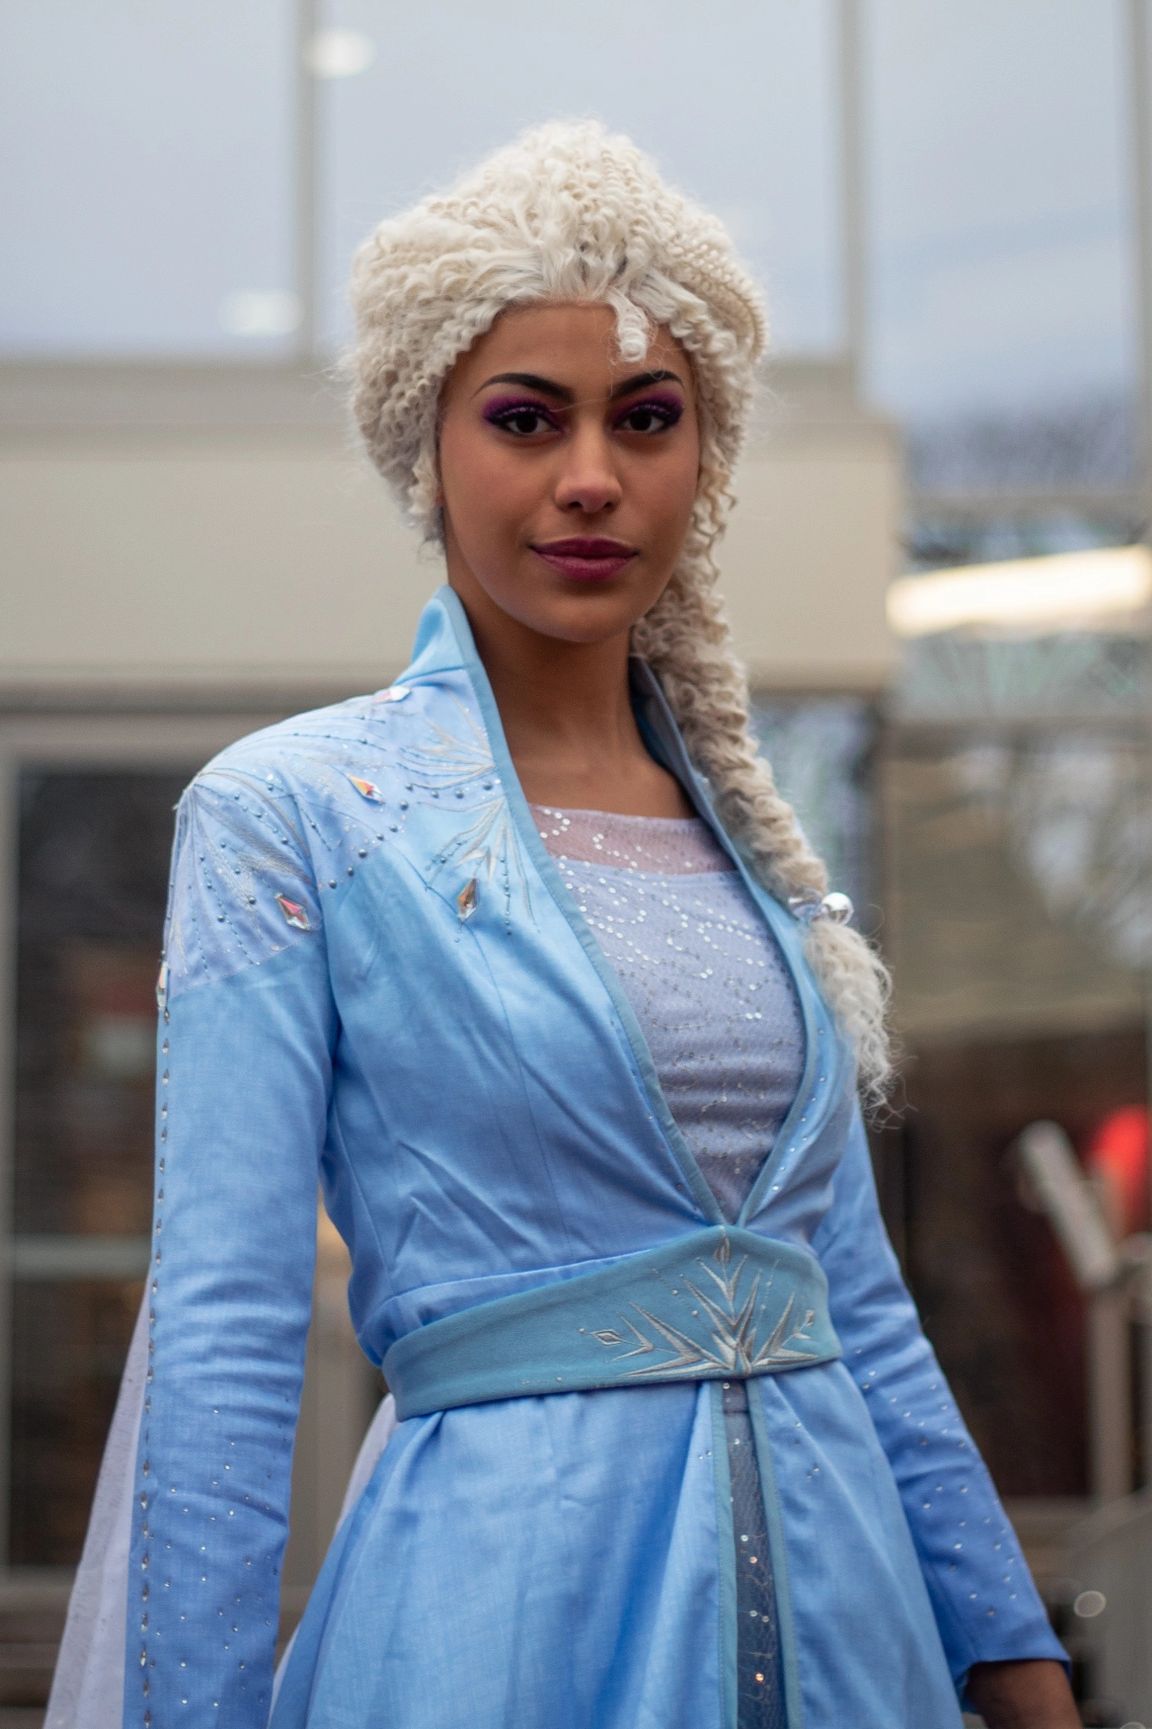 Albany Troy Collar City Ice Queen Elsa Frozen Albany Schenectady Princess Party Cleveland Berea 